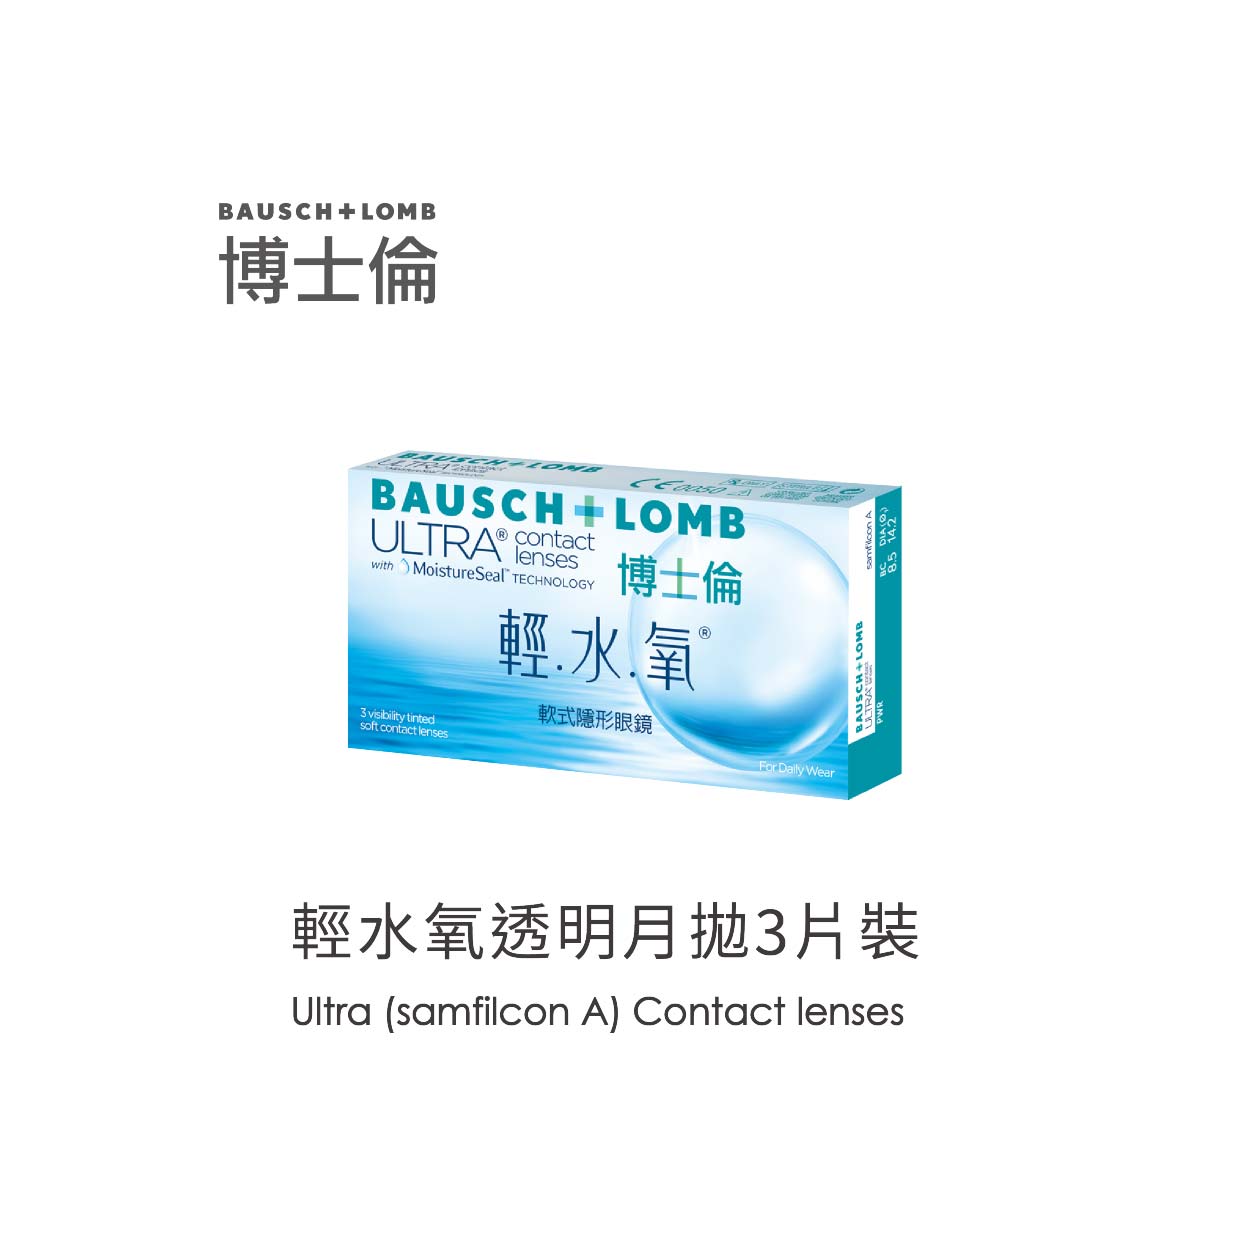 Bausch+Lomb博士倫Ultra輕水氧透明月拋3片裝,,矽水膠材質舒適清透！博士倫輕水氧透明月拋,BL-ULTRA-Tint-3P-M,Bausch+Lomb博士倫Ultra輕水氧透明月拋3片裝,Bausch+LombUltra(samfilconA)SiliconeMonthlyContactlenses